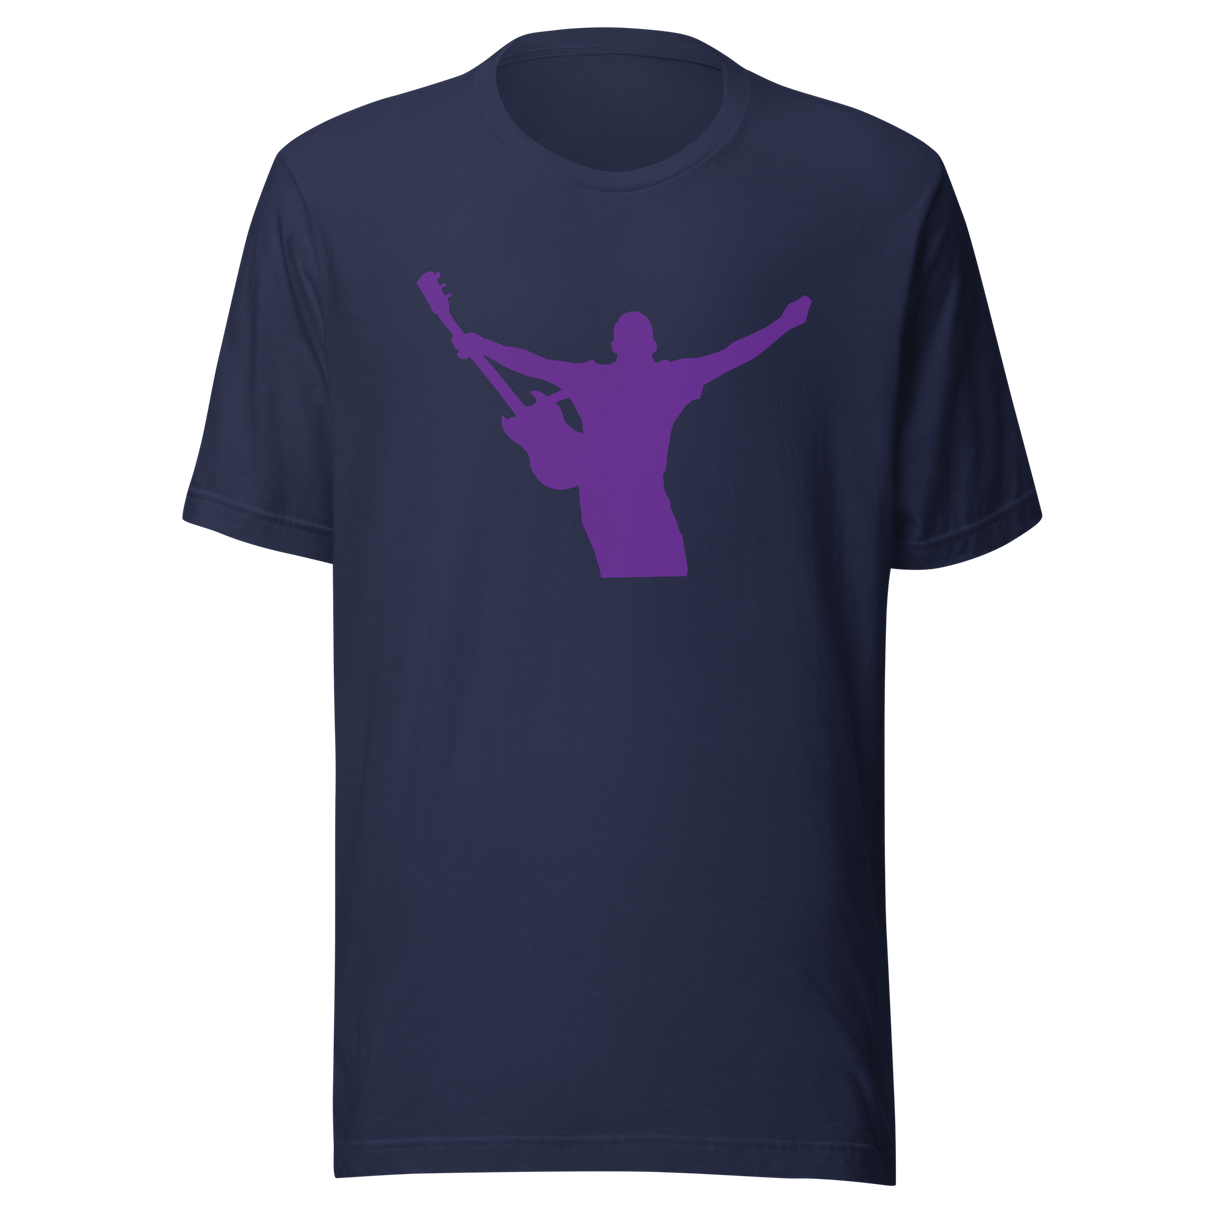 rockstar-with-one-arm-up-holding-a-guitar-music-tee-rockstar-t-shirt-guitar-tee-silhouette-t-shirt-purple-tee#color_navy